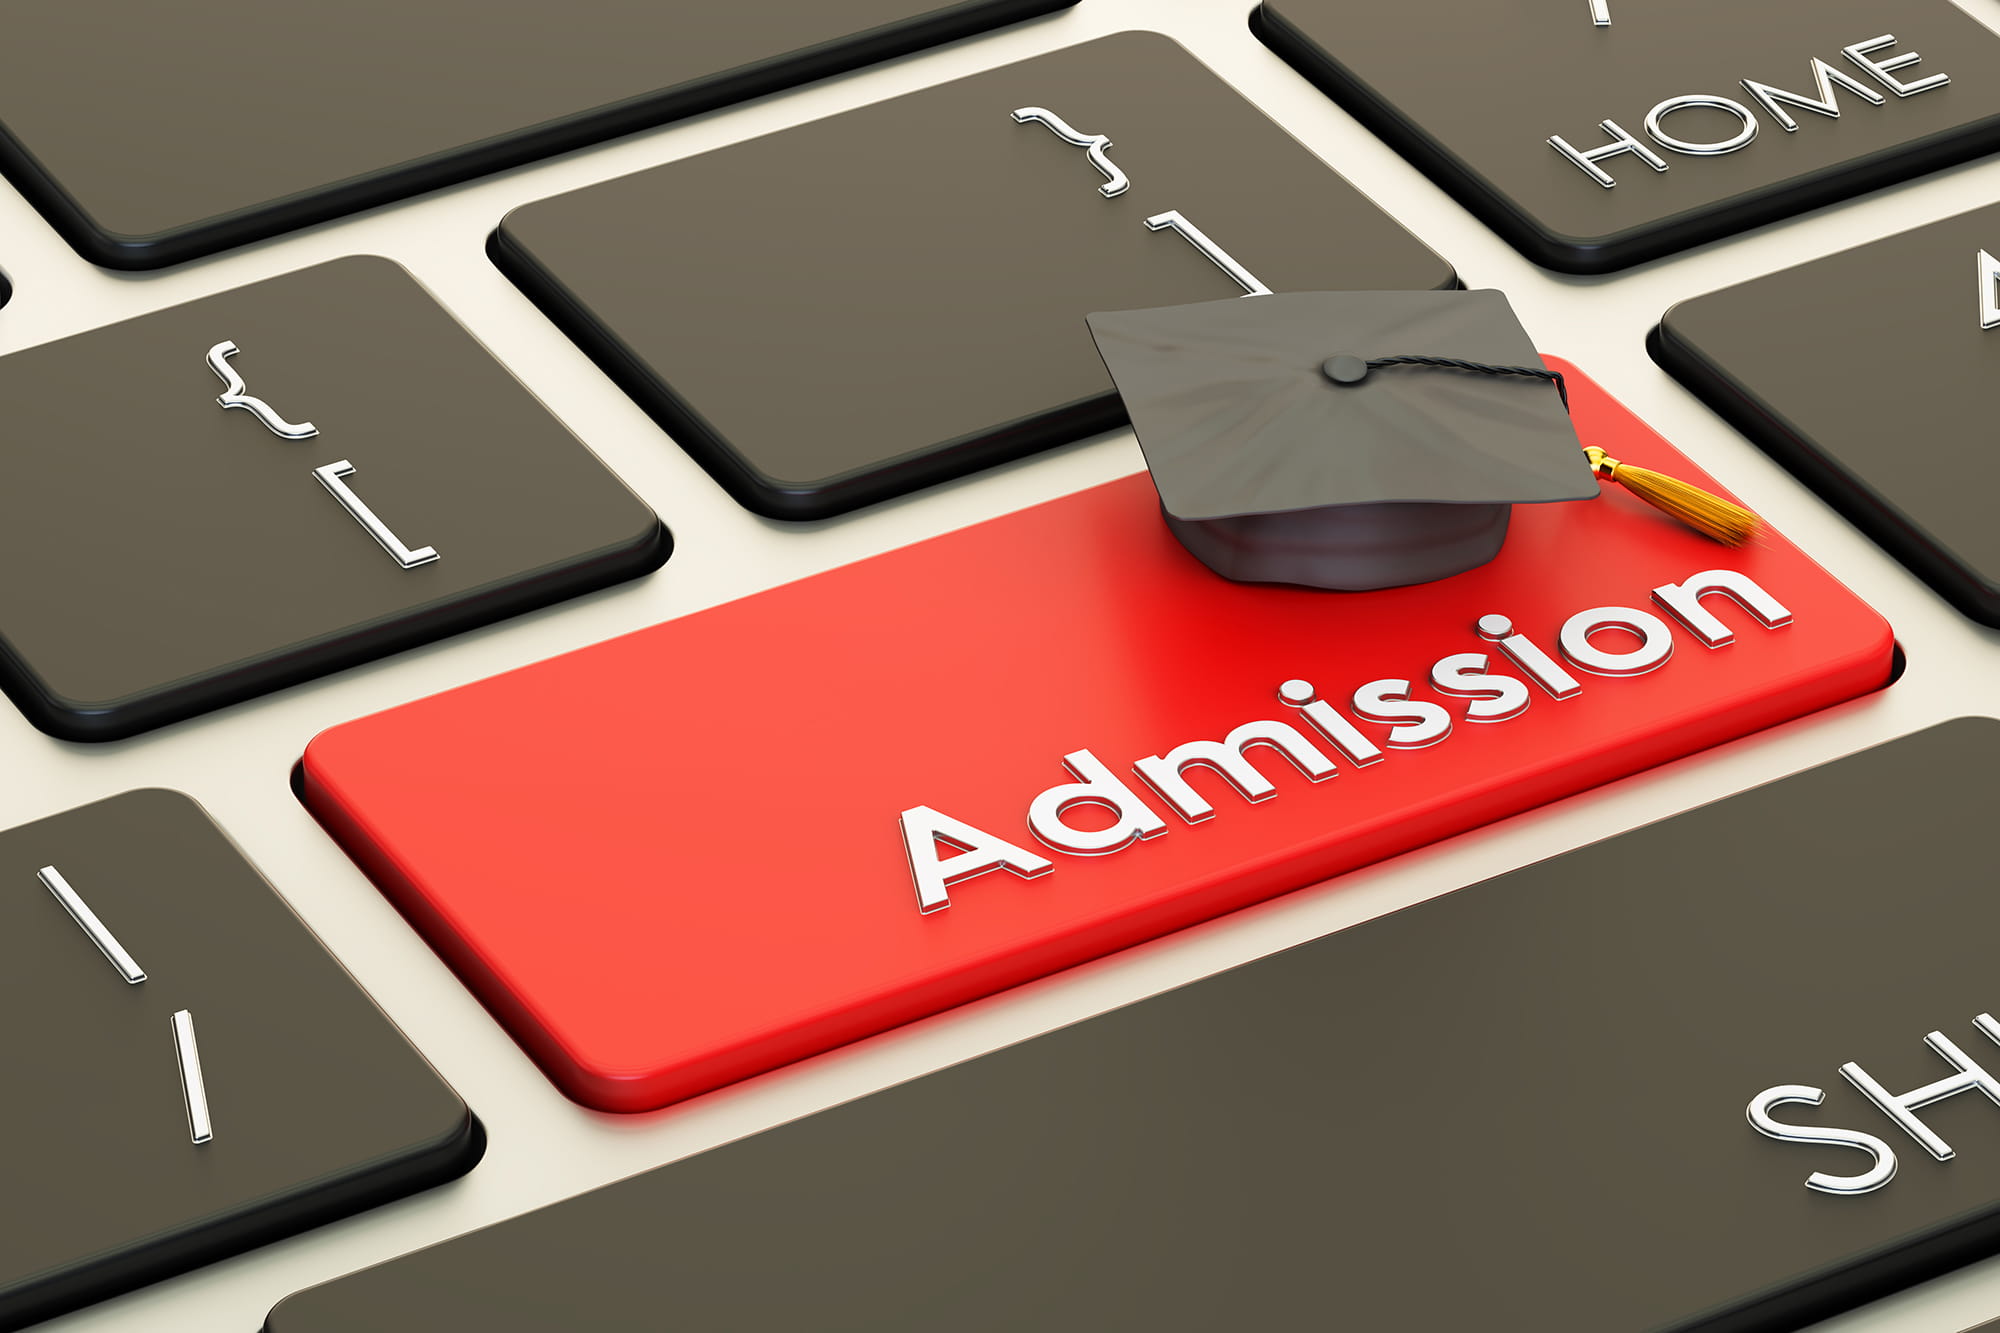 Admissions Button